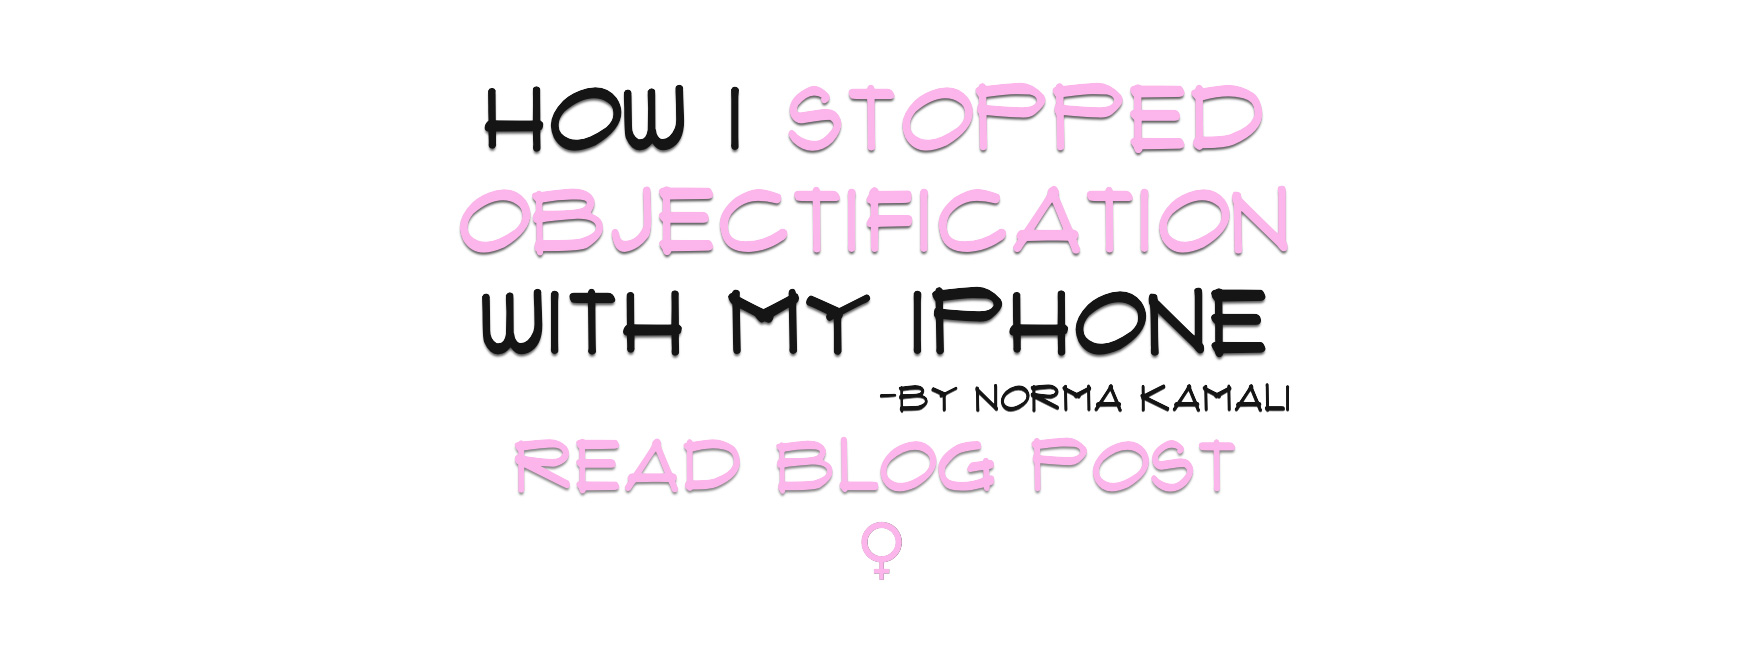 How I stopped objectification with my iPhone